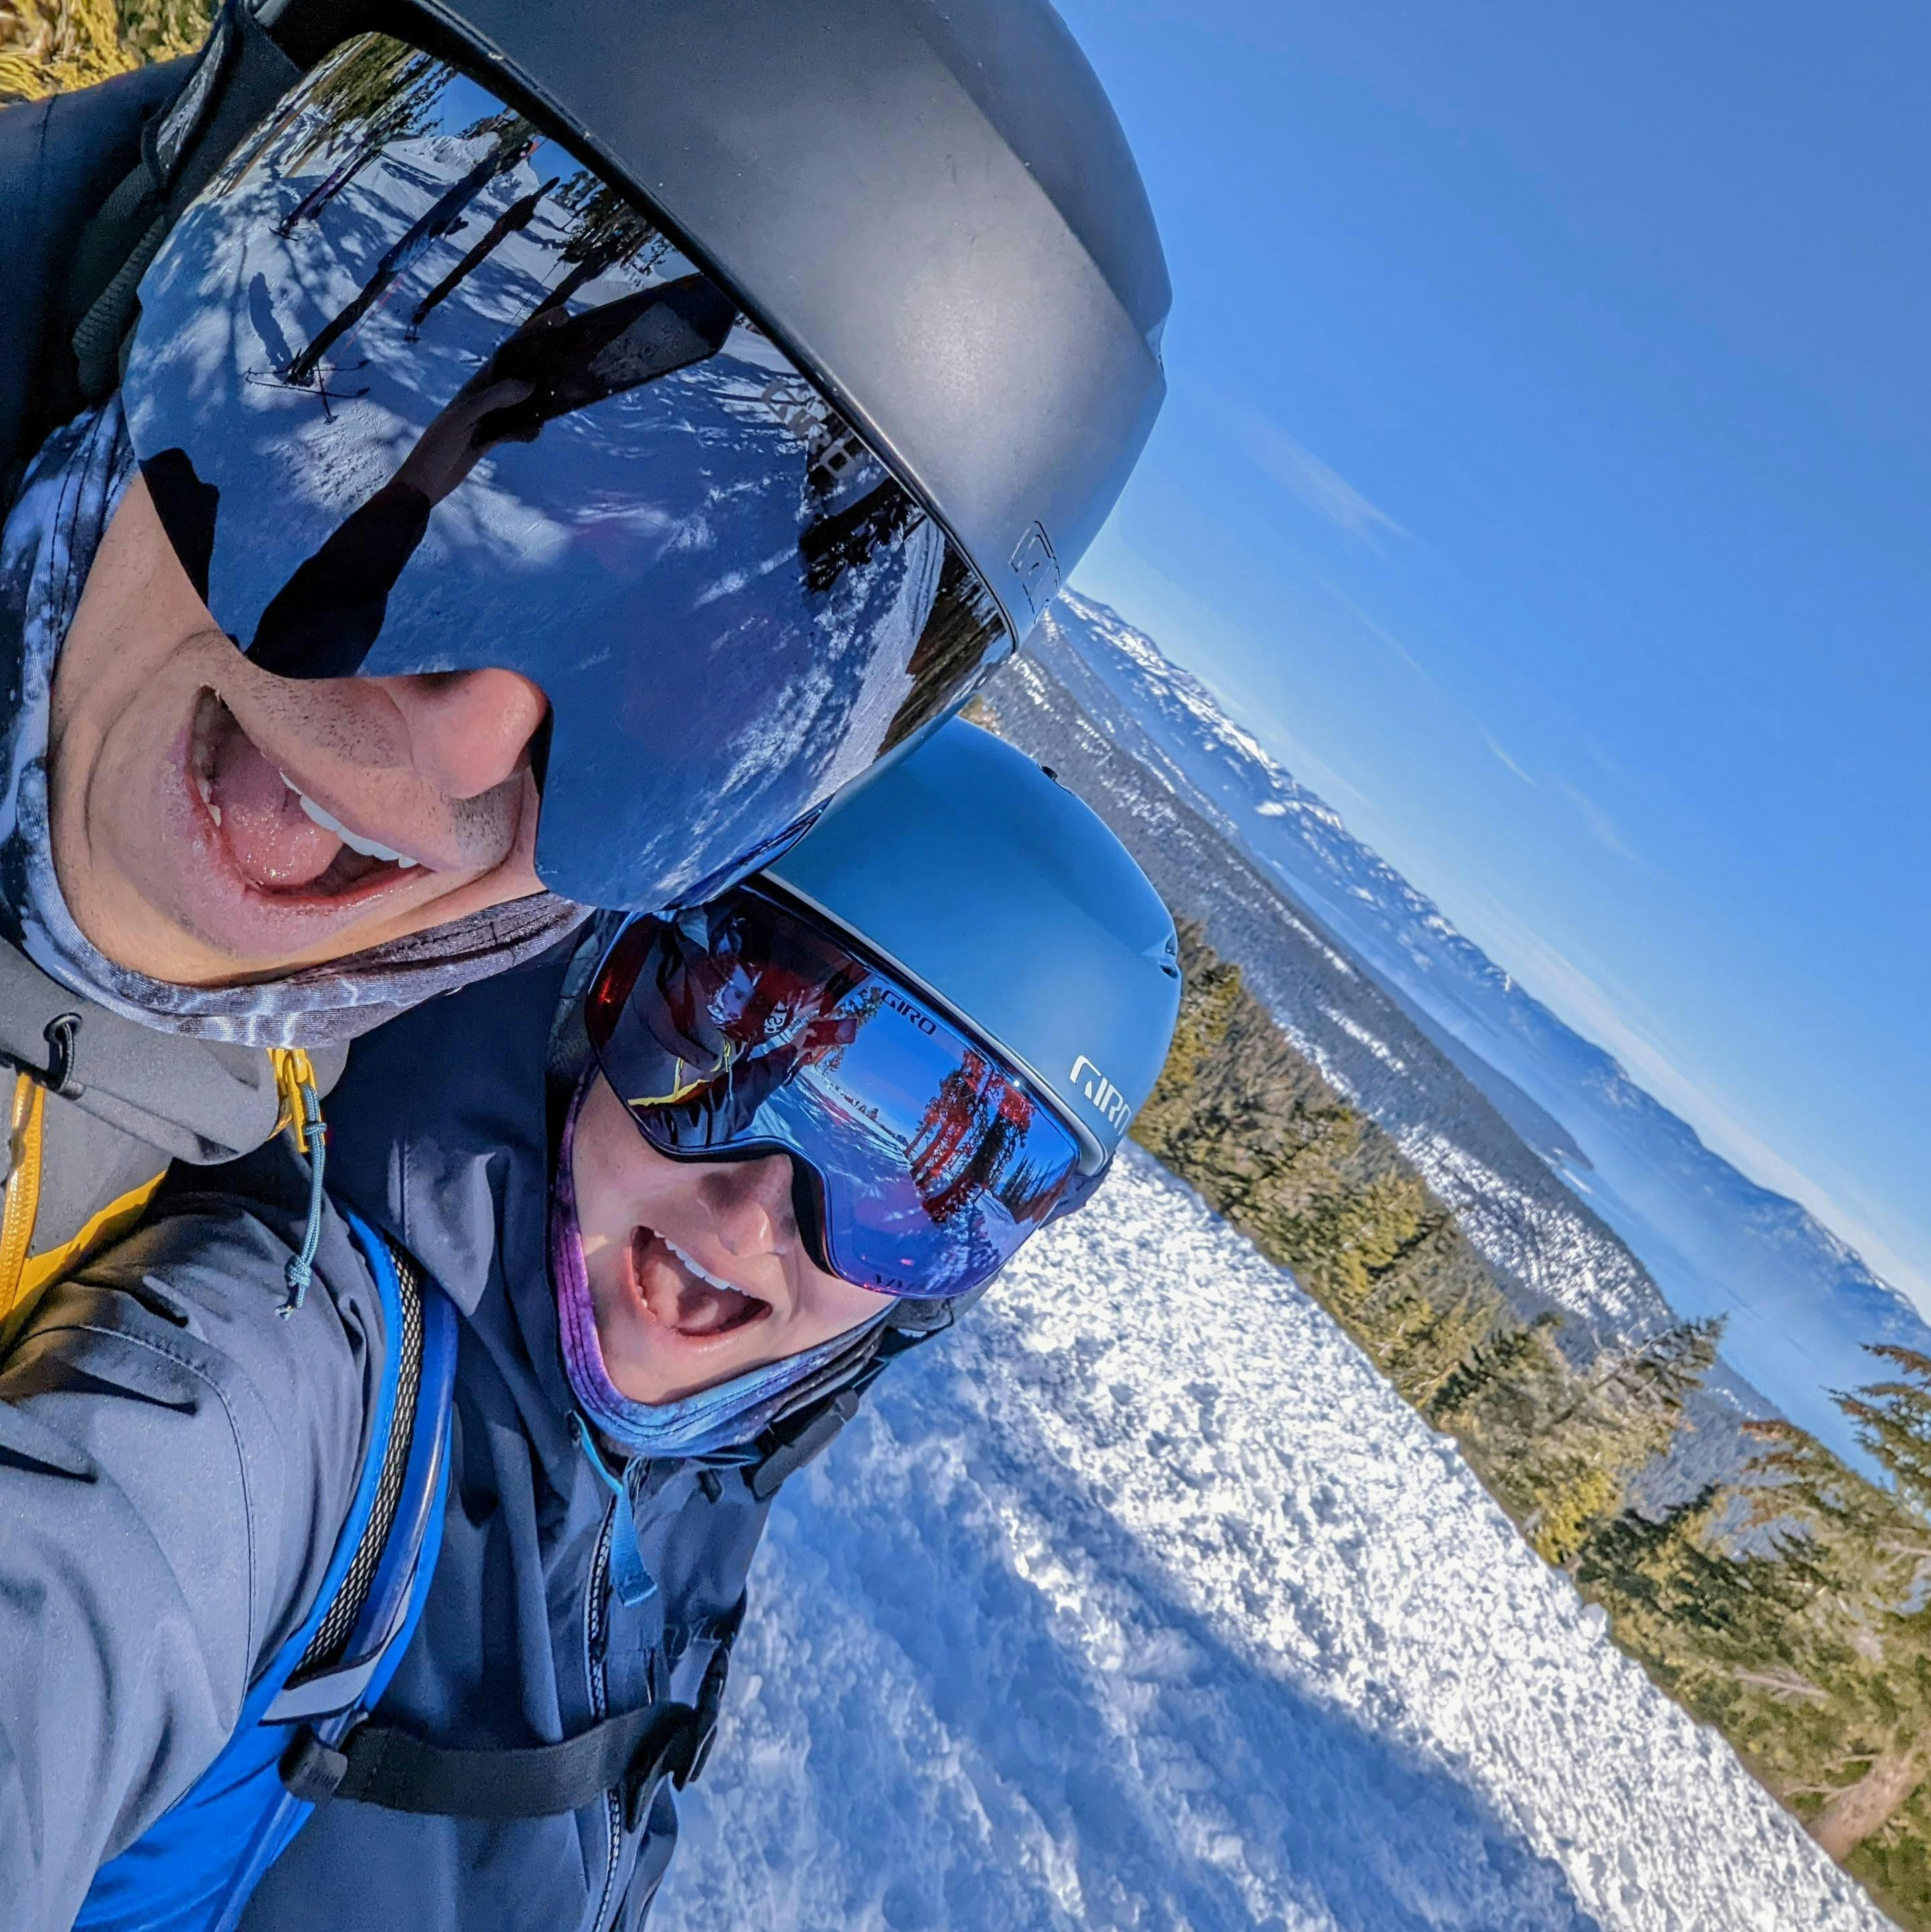 A selfie of two skiers with a snowy ski run in the background. 